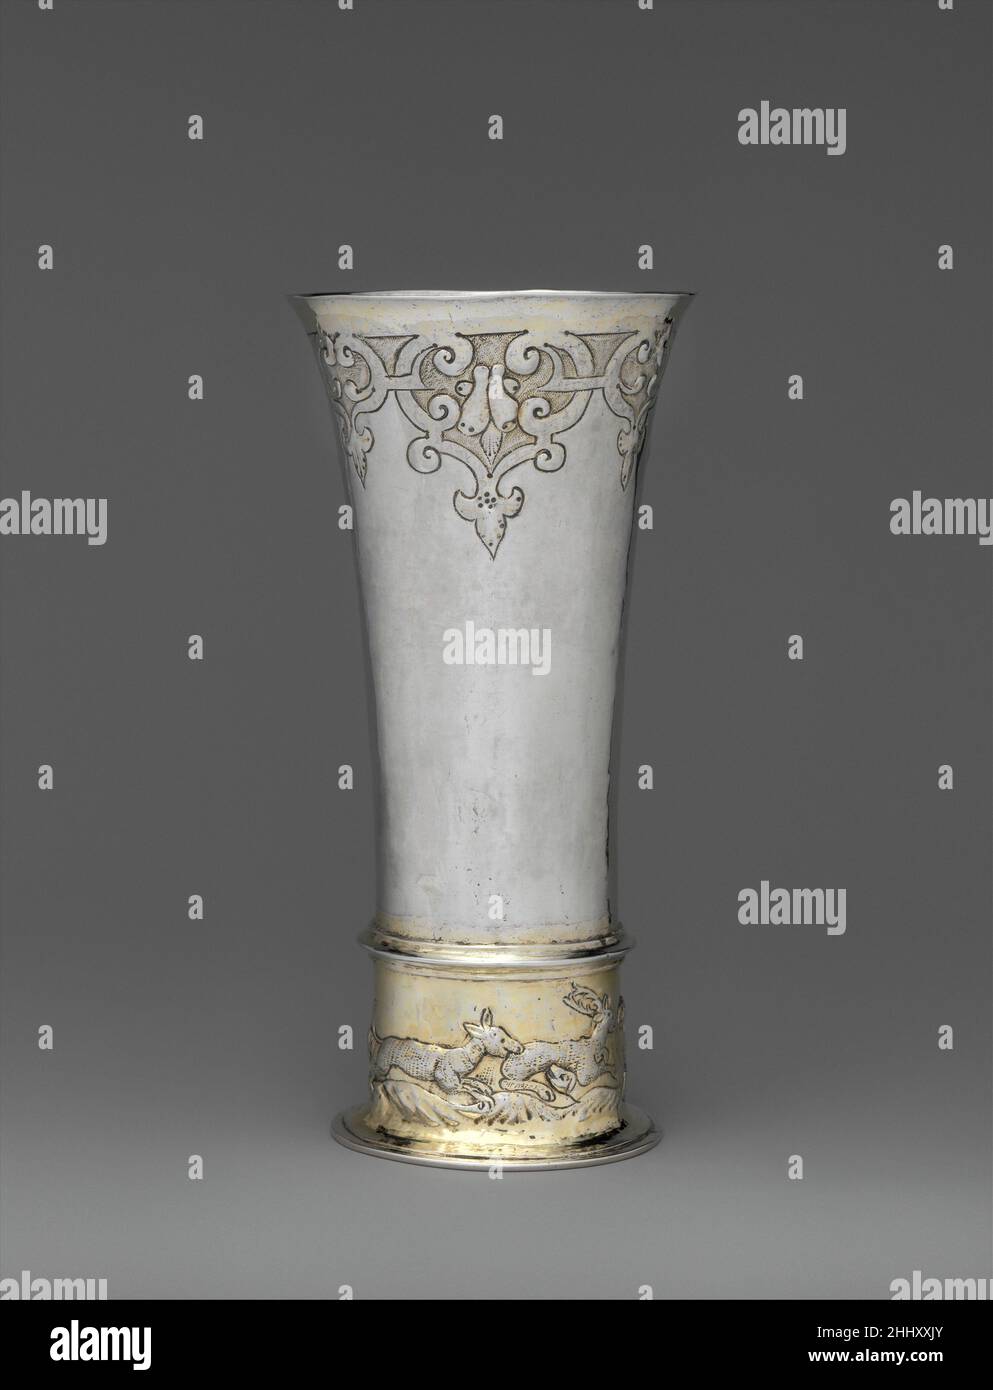 Footed beaker mid-17th century Possibly by Thomas Trepches II The proximity of Hungary to the Ottoman Empire may explain why Hungarian craftsmen and patrons often favored Oriental-inspired patterns, like the stylized arabesque scrollwork below the lip on this beaker, which had been out of fashion in Western Europe for almost two generations. The hunting scene at the base refers to the exclusive right of the local nobility to hunt certain game animals.LiteratureTihamér Gyárfás. A brassai ötvösség története. Brassó, 1912, p. 107, no. 179.Judit H. Kolba. Hungarian Silver: The Nicolas M. Salgo Col Stock Photo